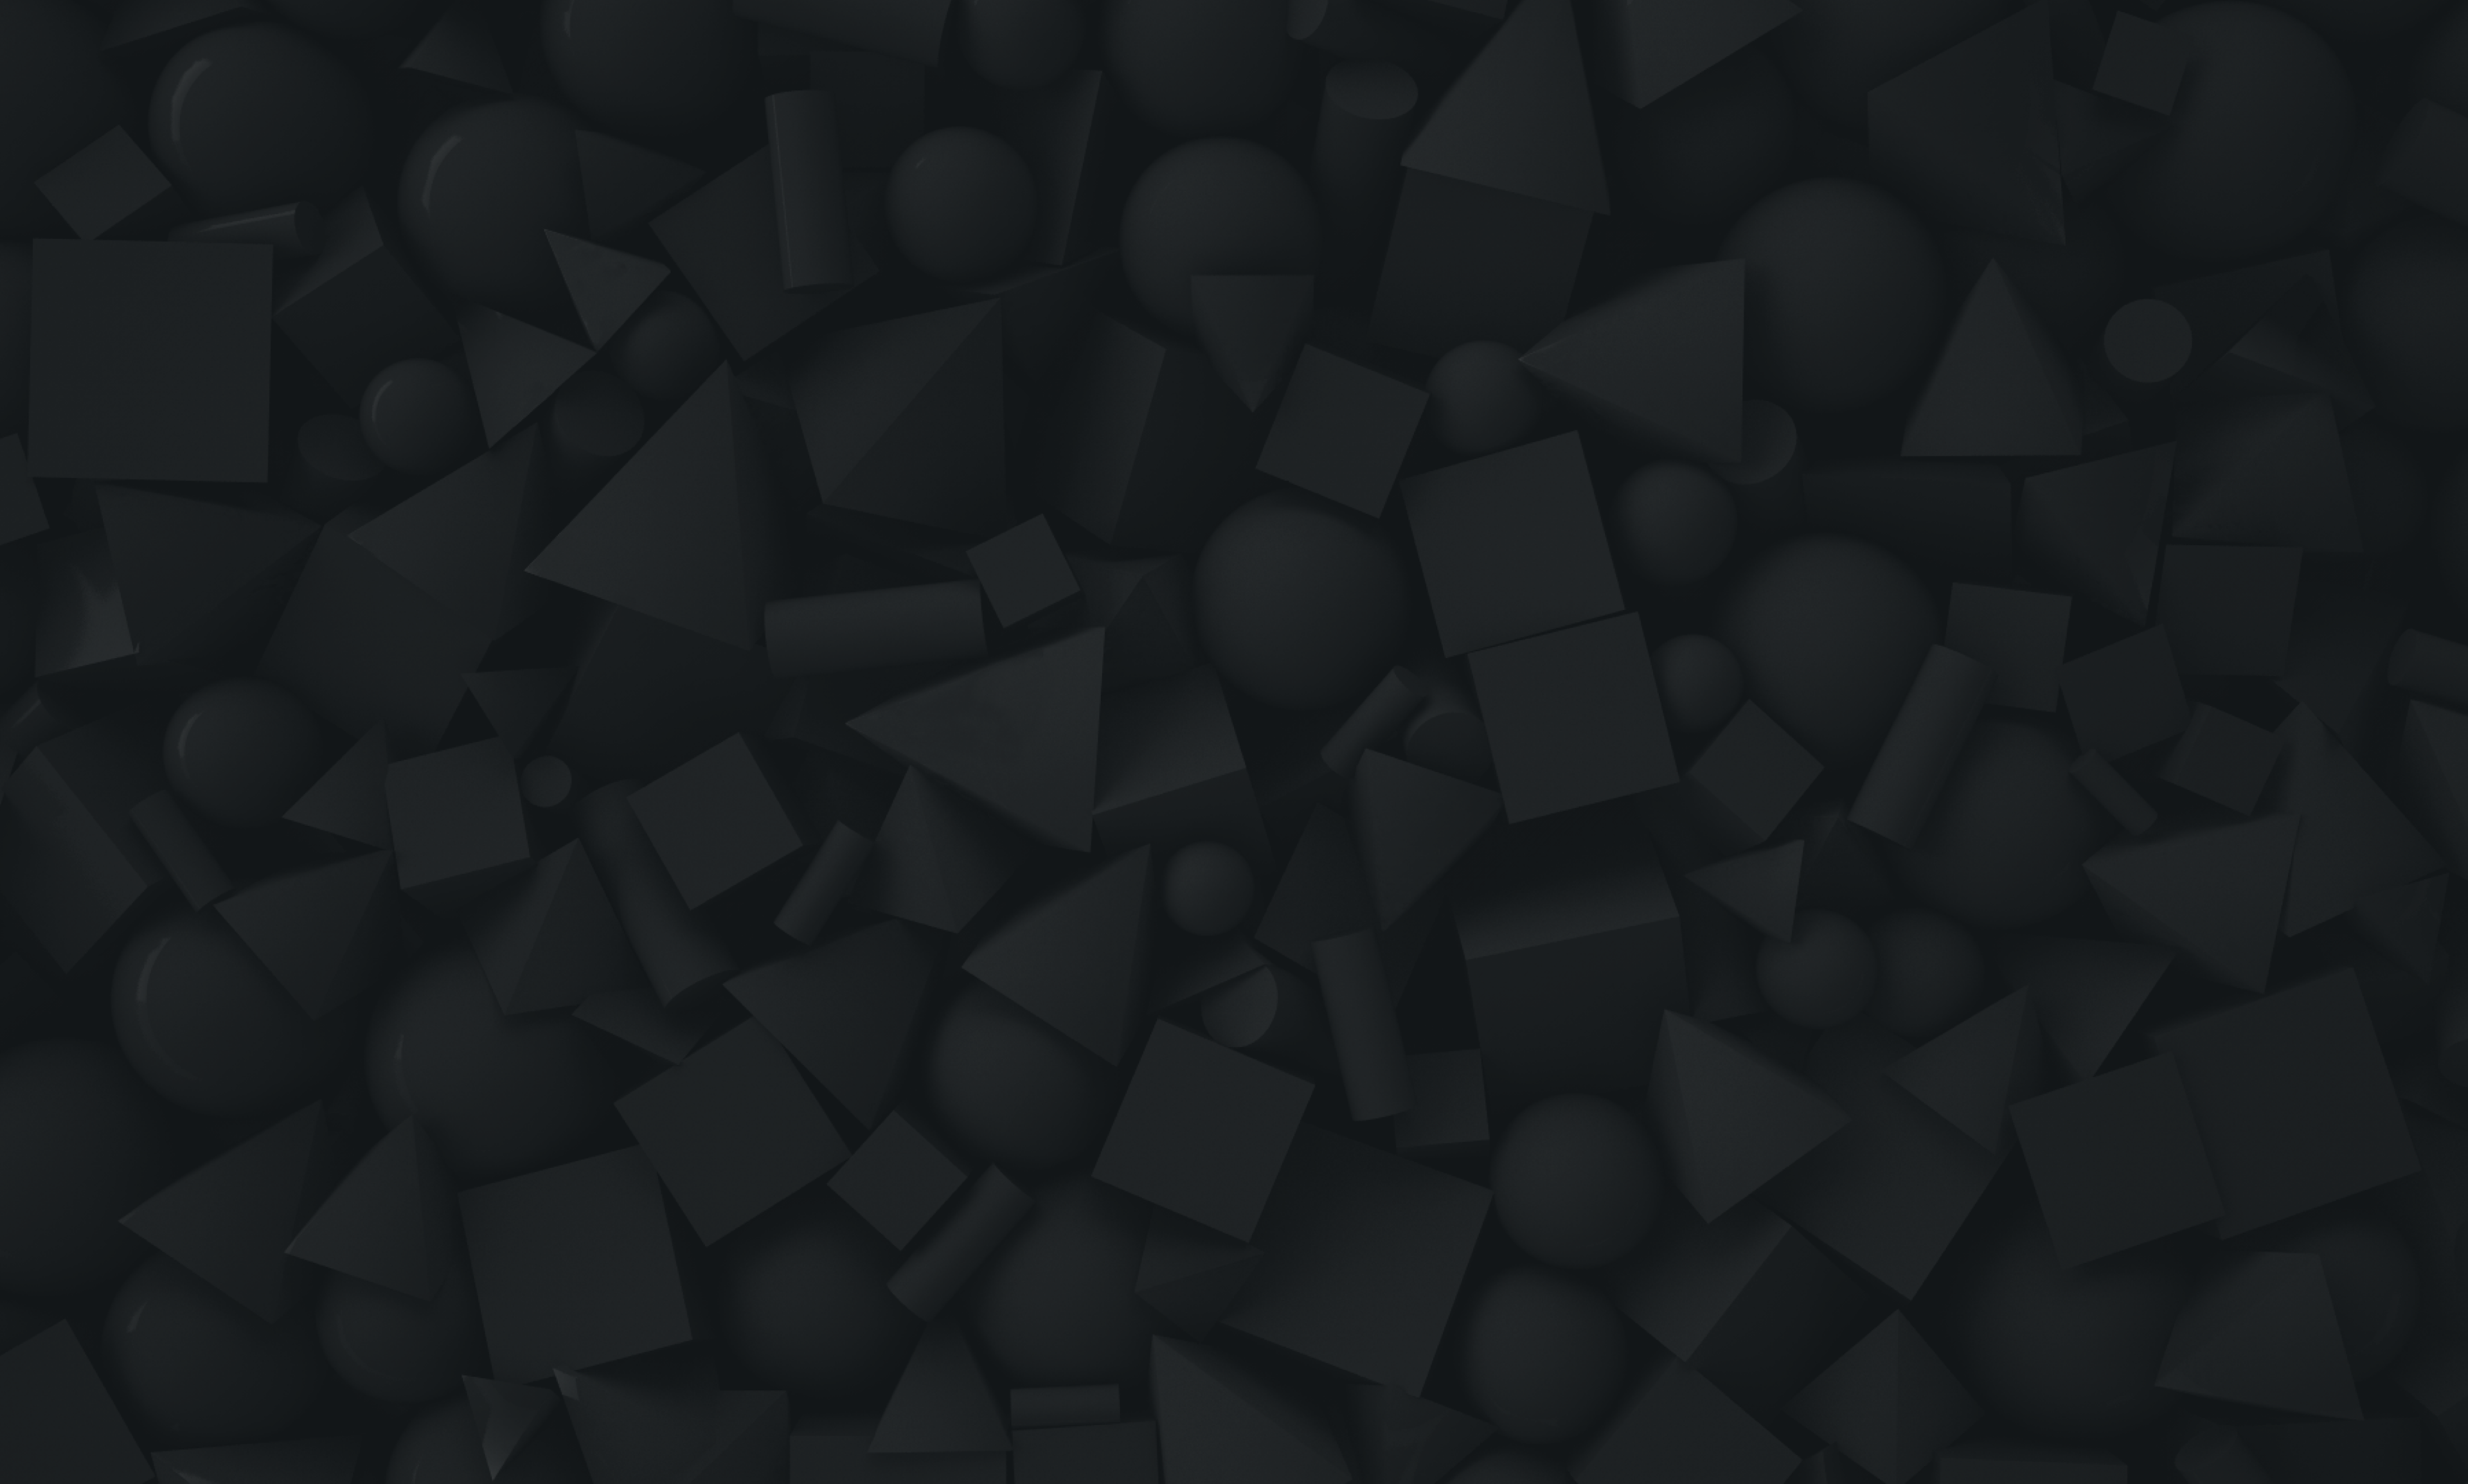 small scattered charcoal 3d shapes on a black background